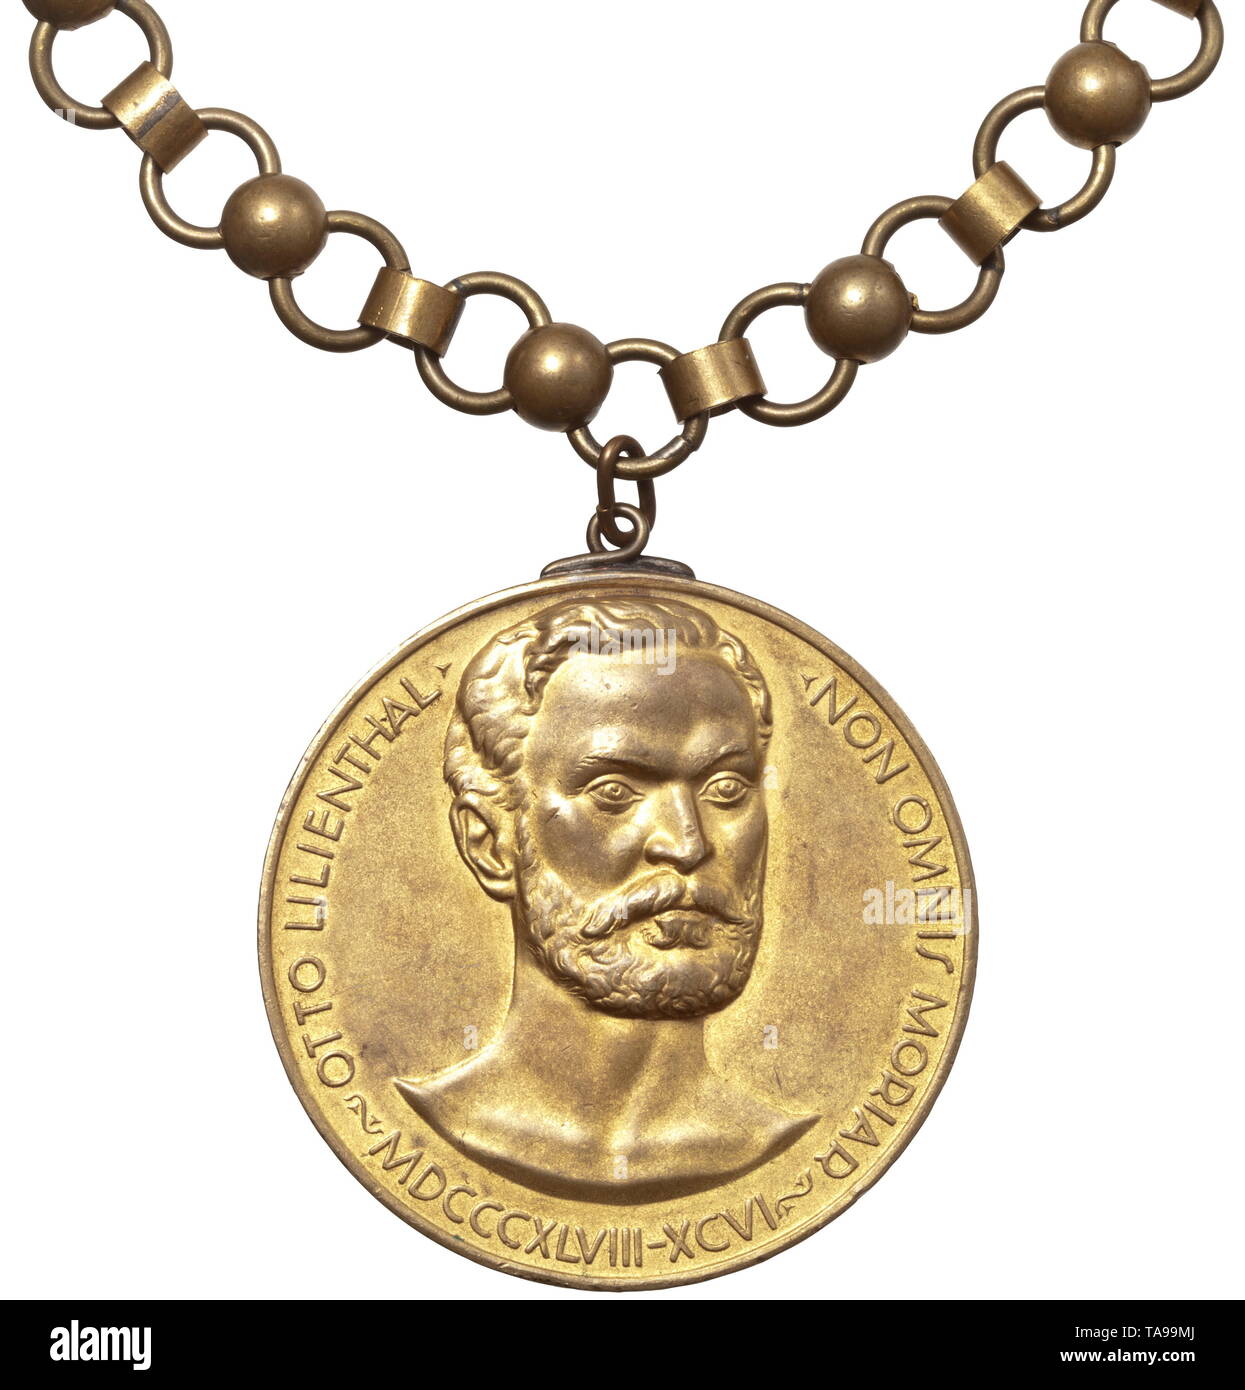 An Otto Lilienthal badge - Scientific Aviation Society Award for wear consisting of a large gilt medal with 65 mm in diameter. On the obverse depiction of Otto Lilienthal with circumscription '1843-96' and motto 'Non Omnis Moria' (tr. 'I will not die'), the reverse with inscription 'Für hervorragende Verdienste - Die wissenschaftliche Gesellschaft für Luftfahrt' (tr. 'For outstanding achievements - the Scientific Aviation Society'). On a long multi-link chain with elements made of non-ferrous metal, length circa 80 cm. Both medal and chain unmark, Additional-Rights-Clearance-Info-Not-Available Stock Photo